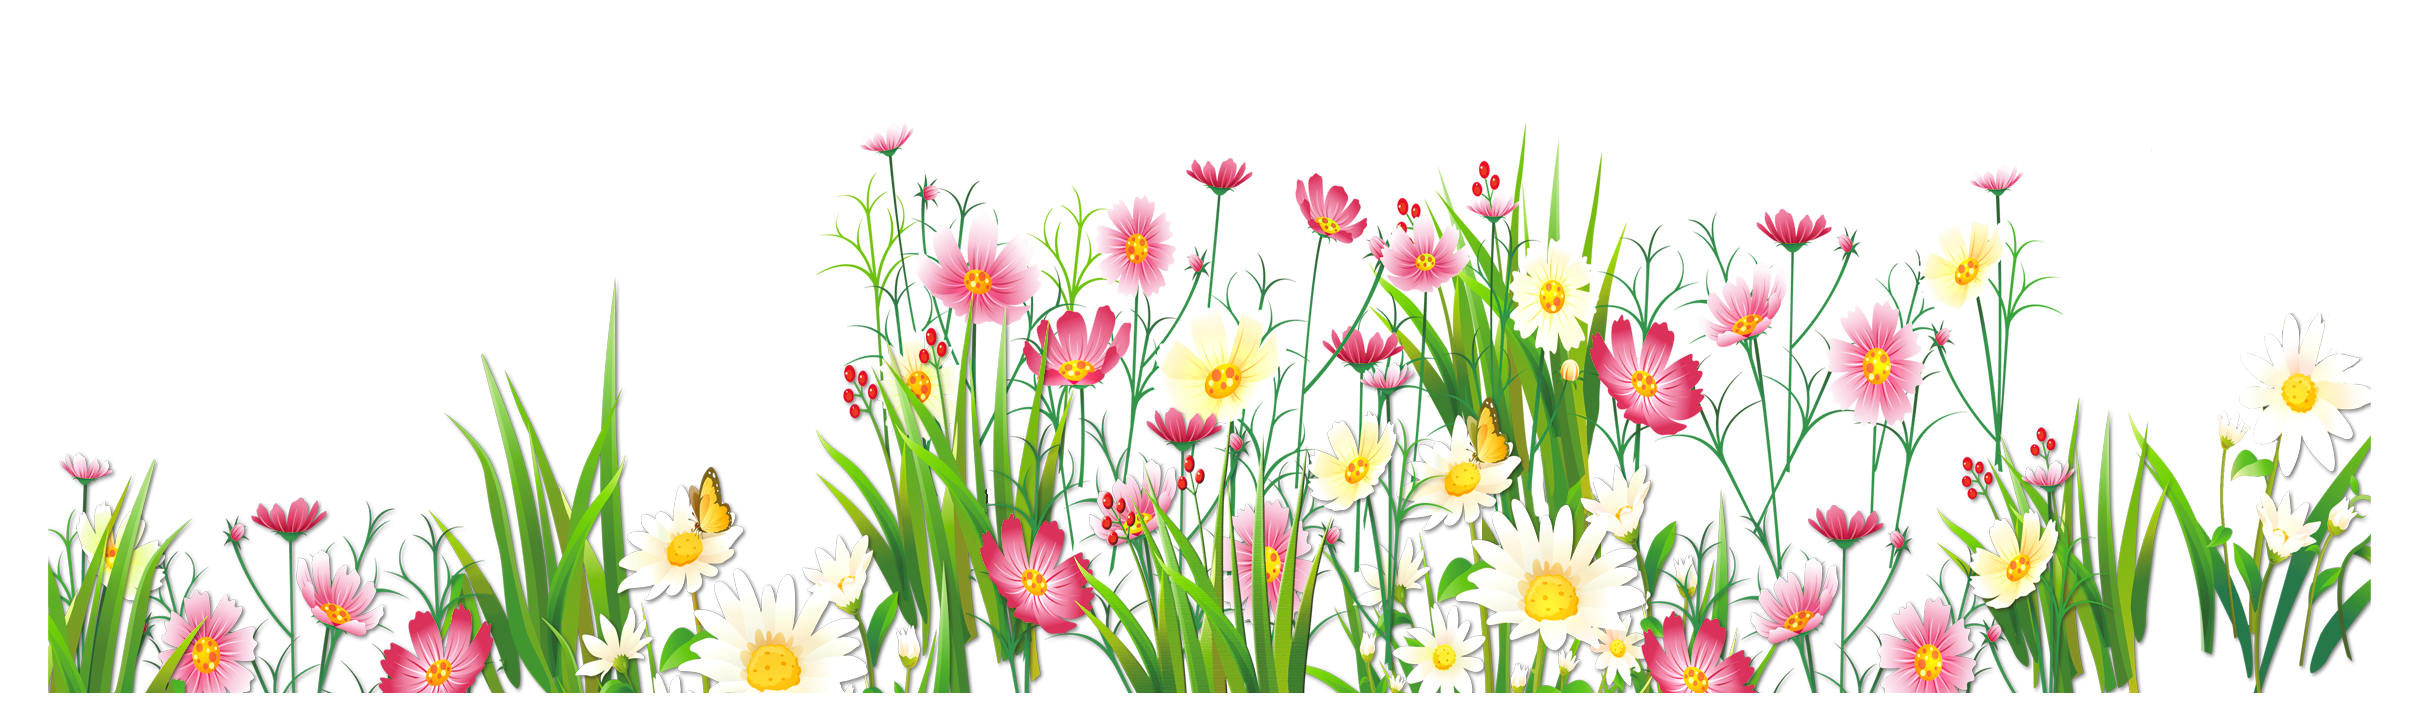 Flowers and Grass PNG Picture Clipart | Gallery Yopriceville 